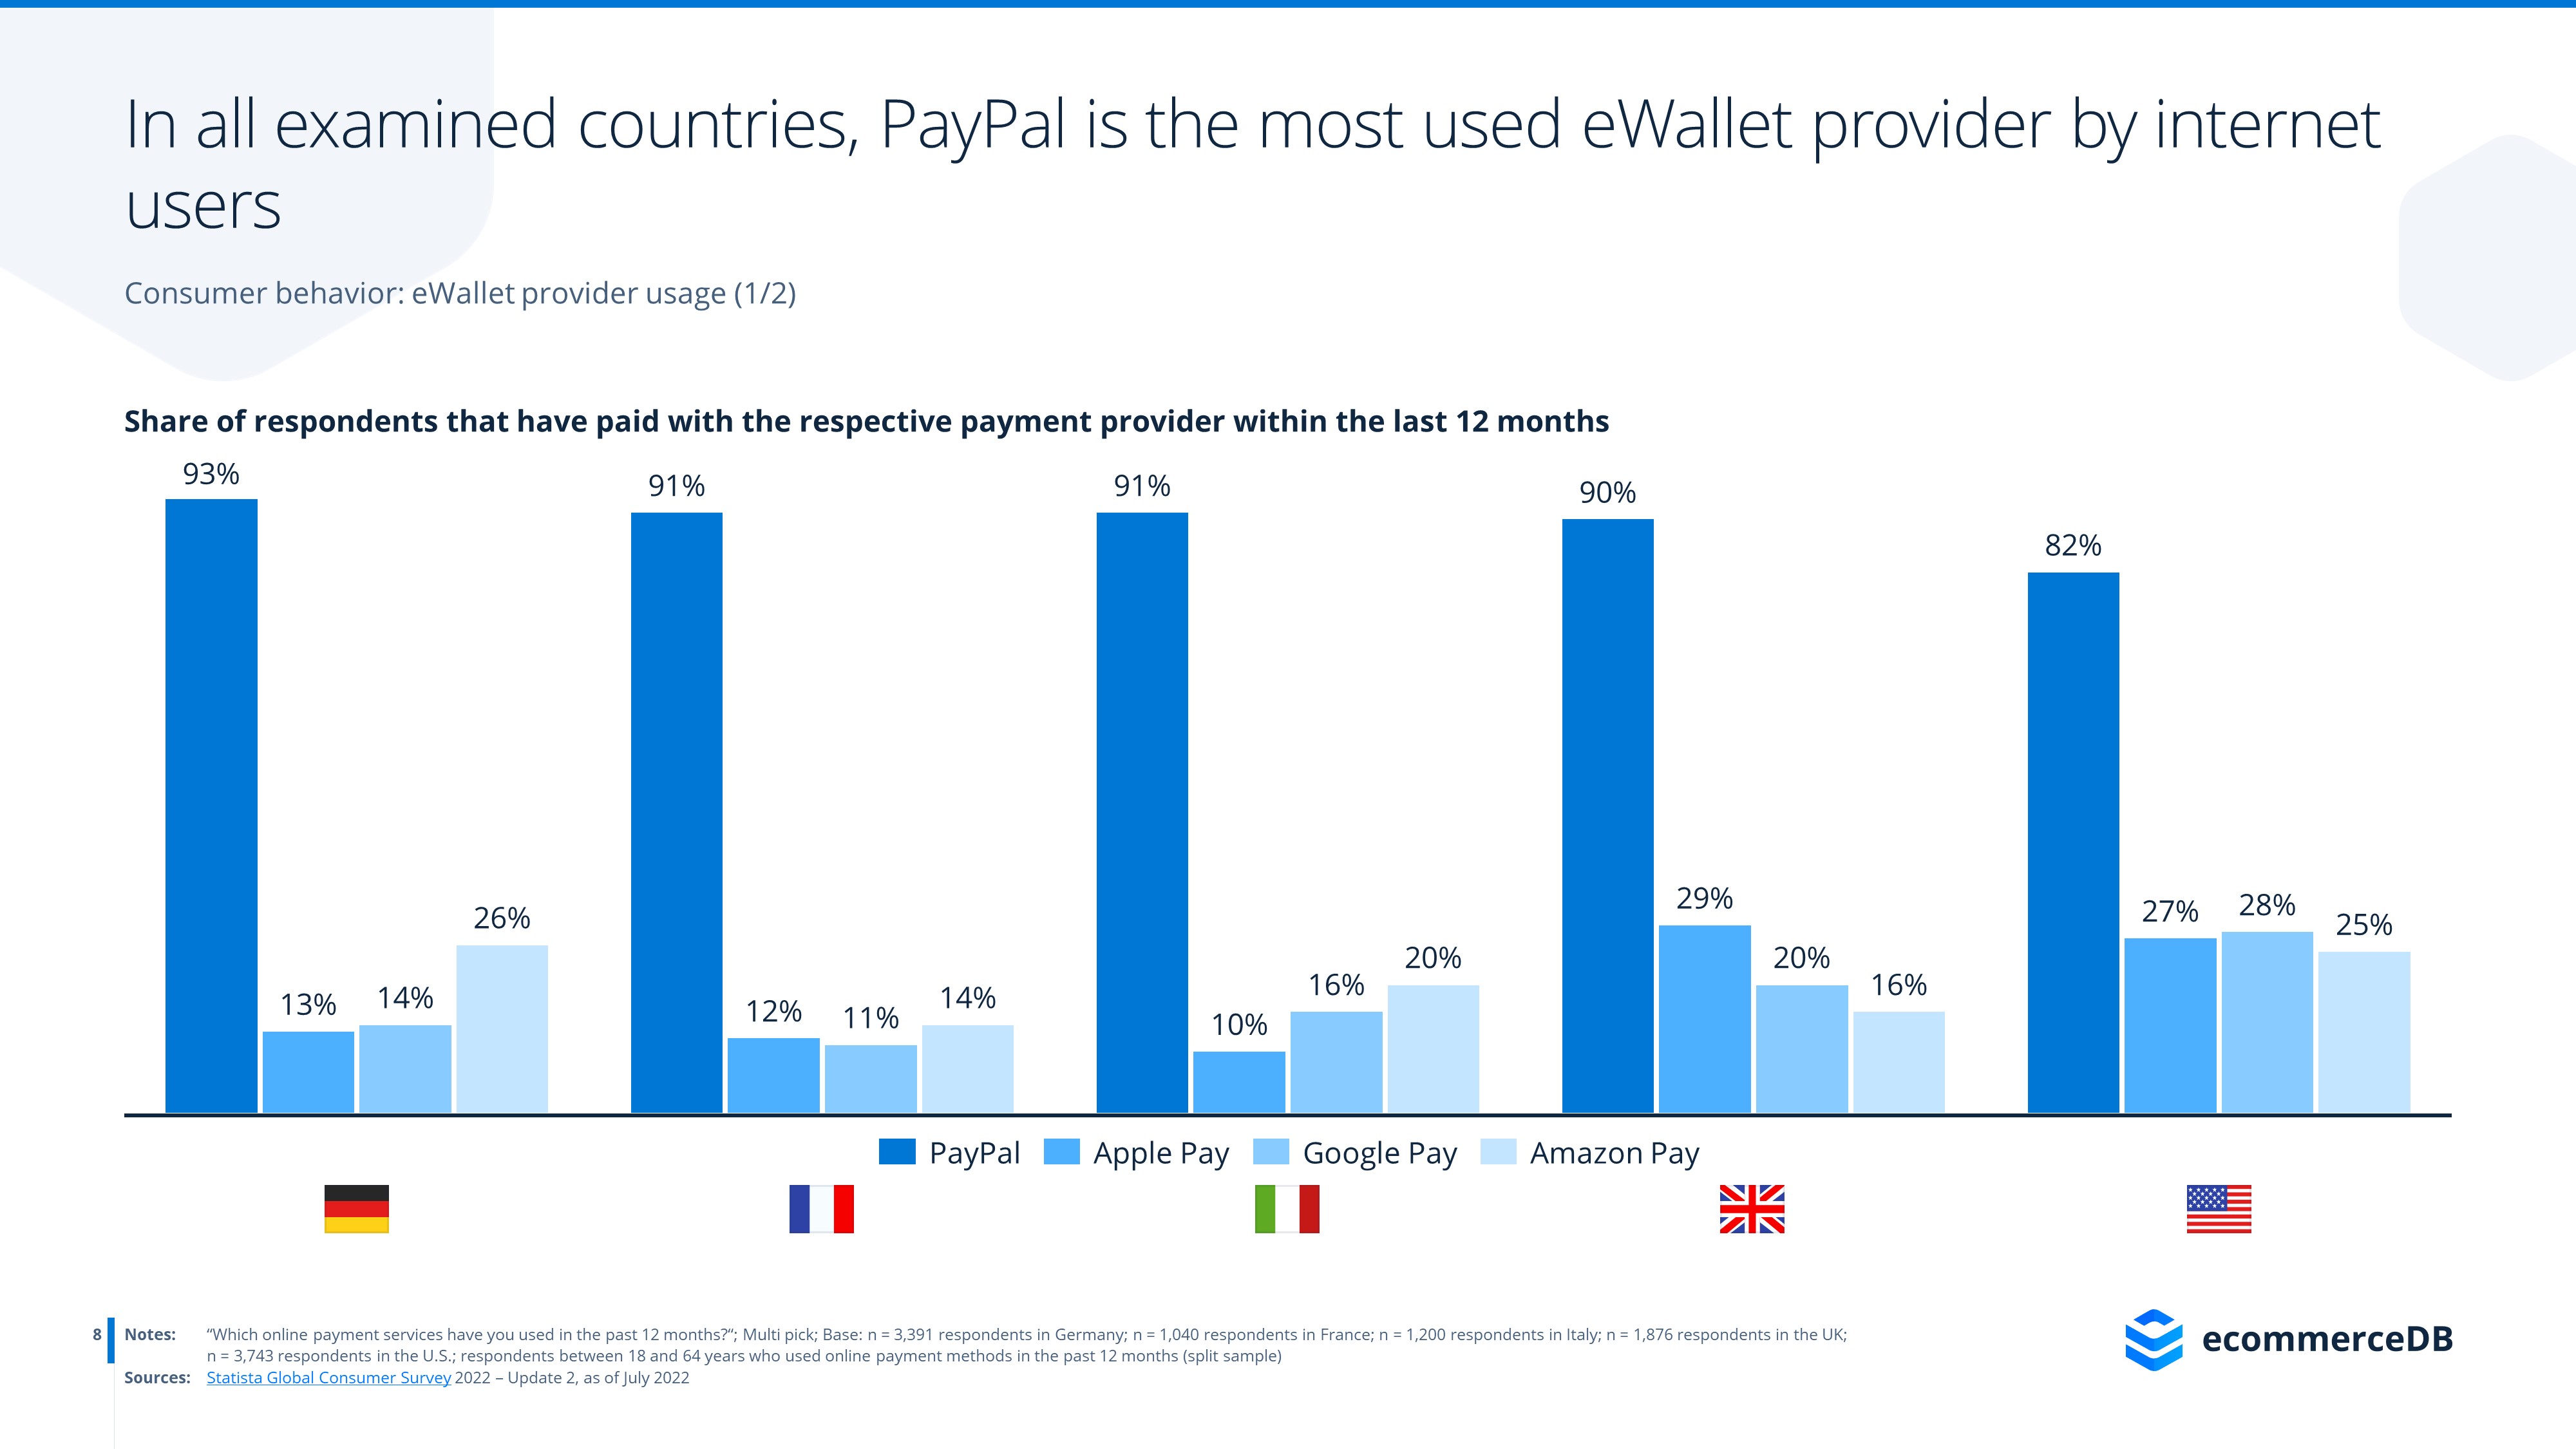 ecommerceDB Infographic: Payment Providers_PayPal_2022_1.jpg